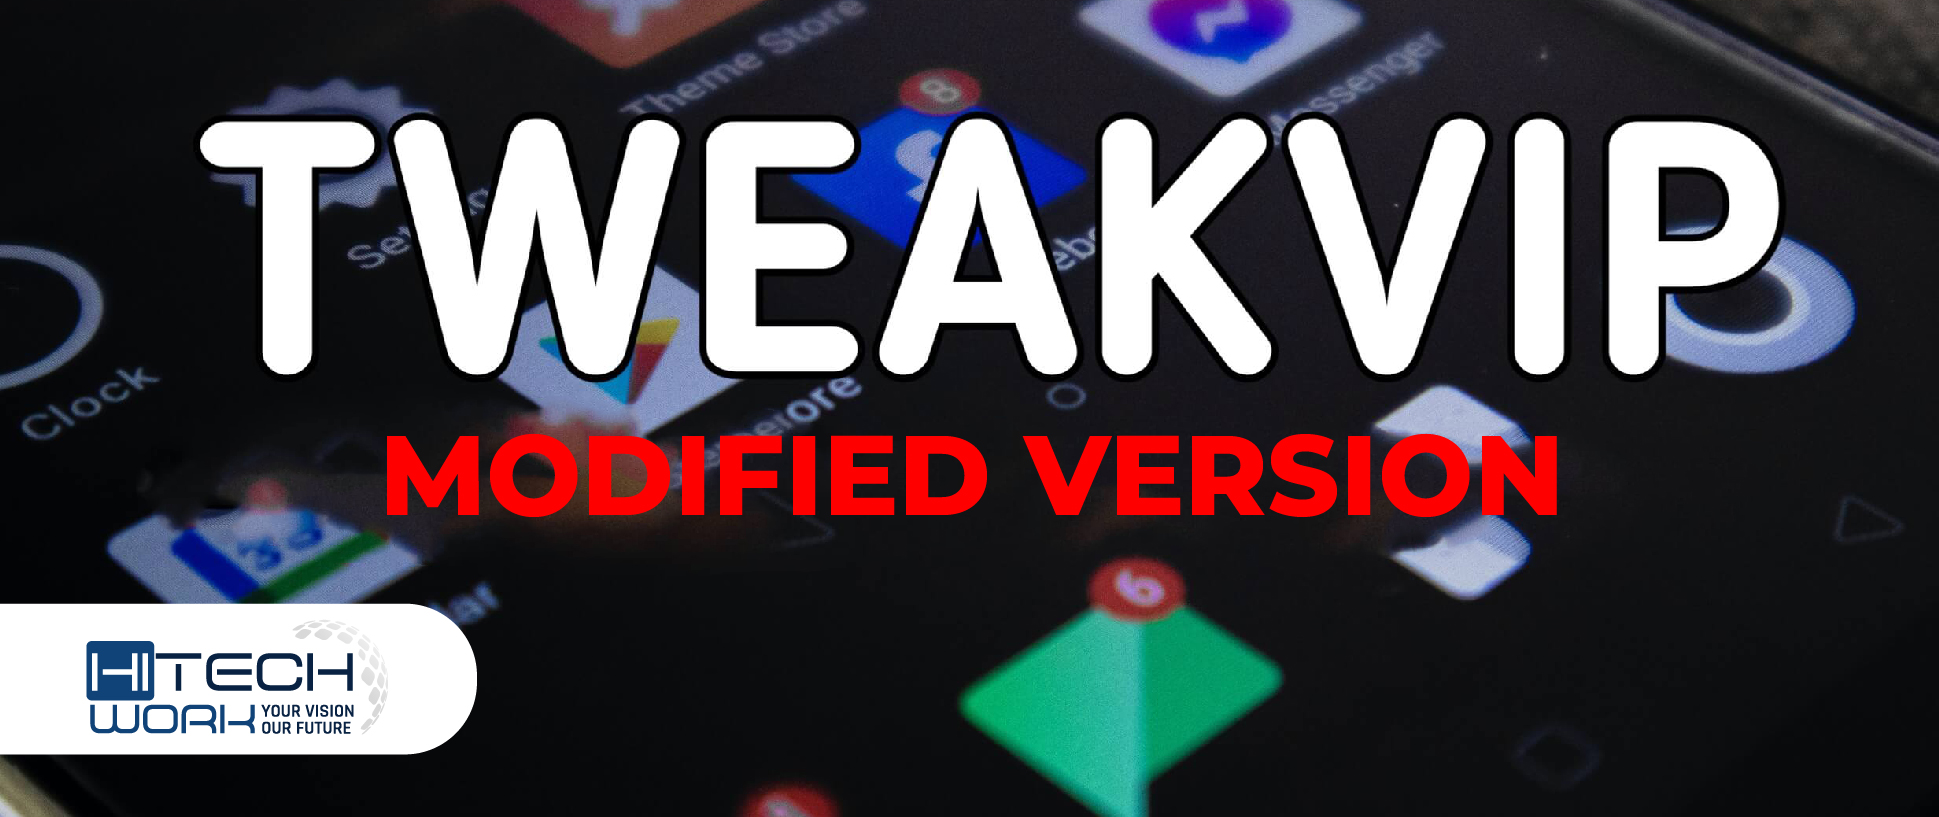 Modified Versions of Android Apps: TweakVIP